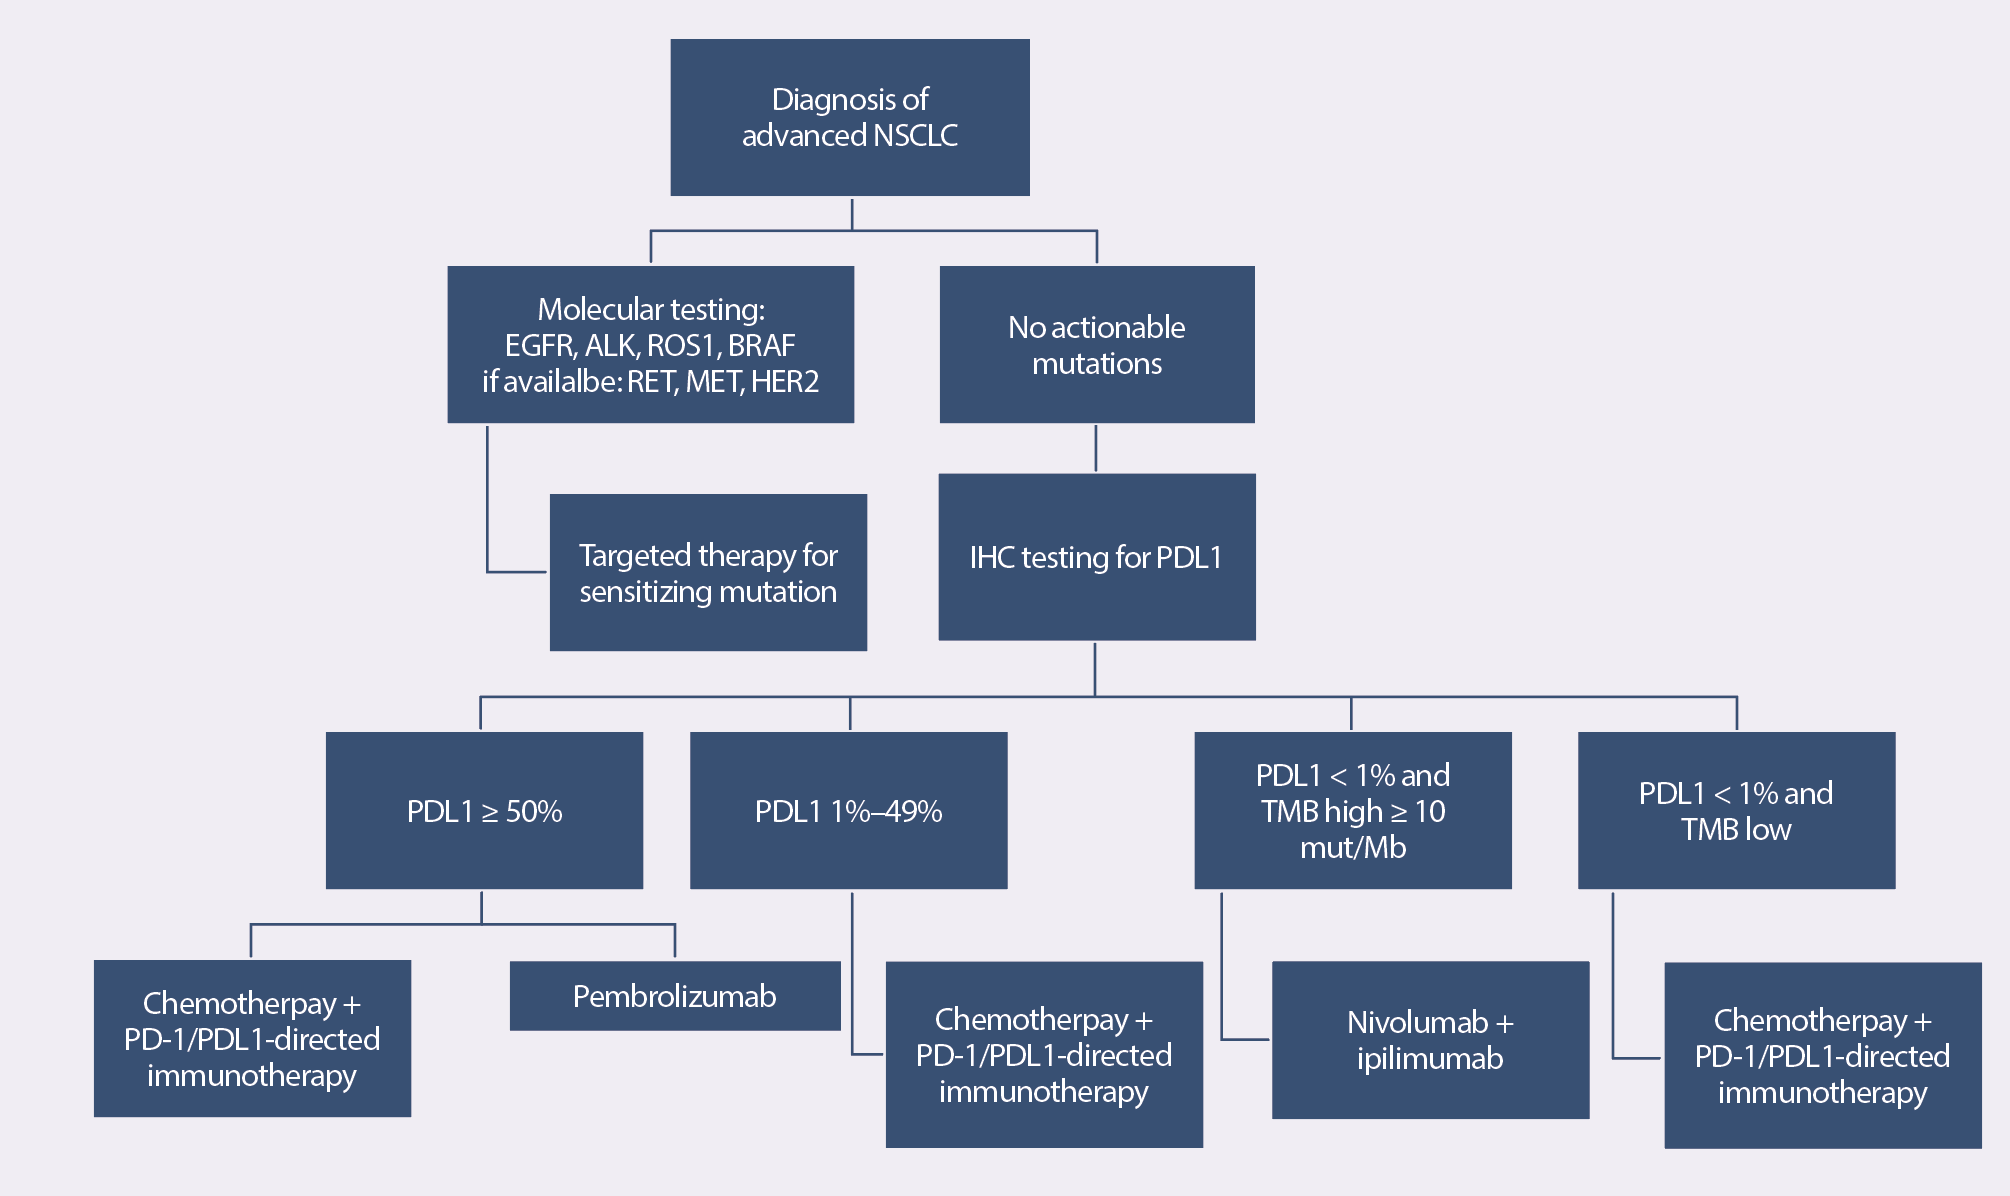 Treatment Algorithm for Stage IV Non-Small Cell Lung Cancer